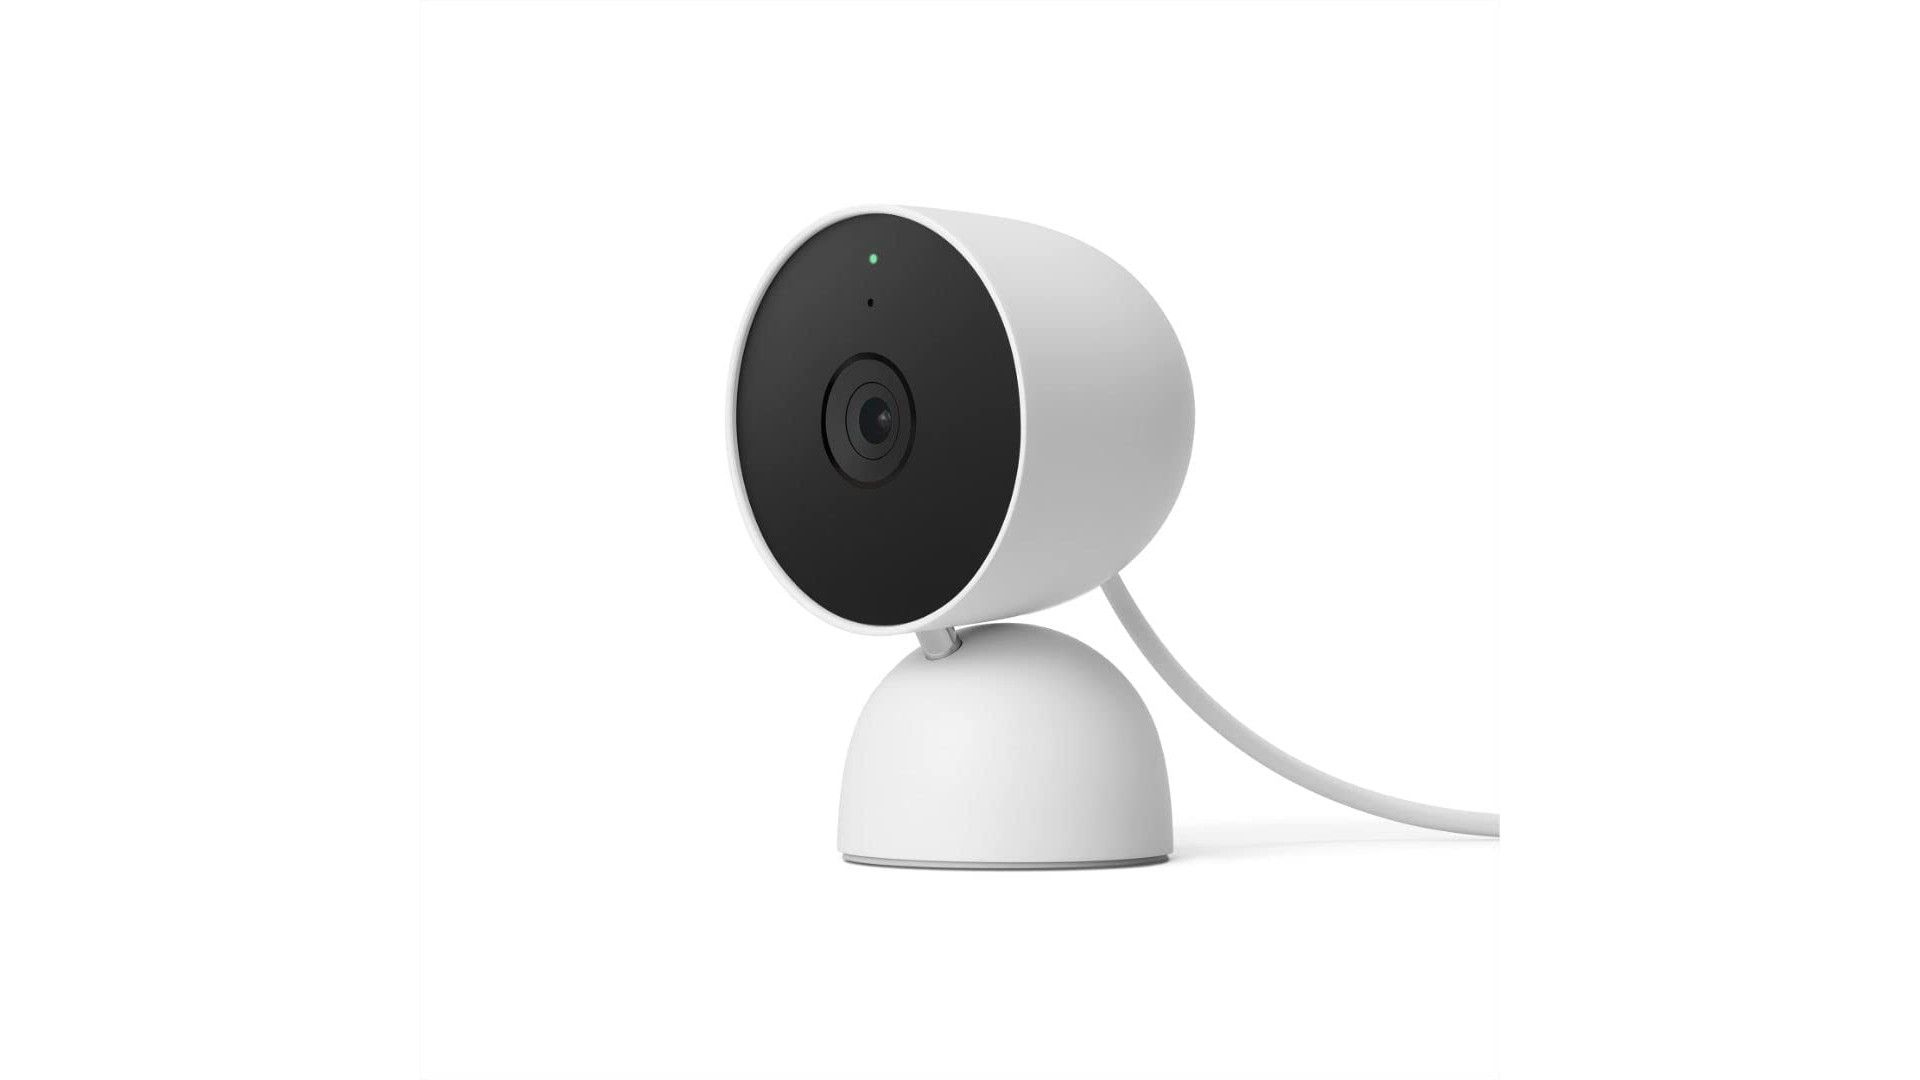 A Google Nest Security Cam is shown on a white background.